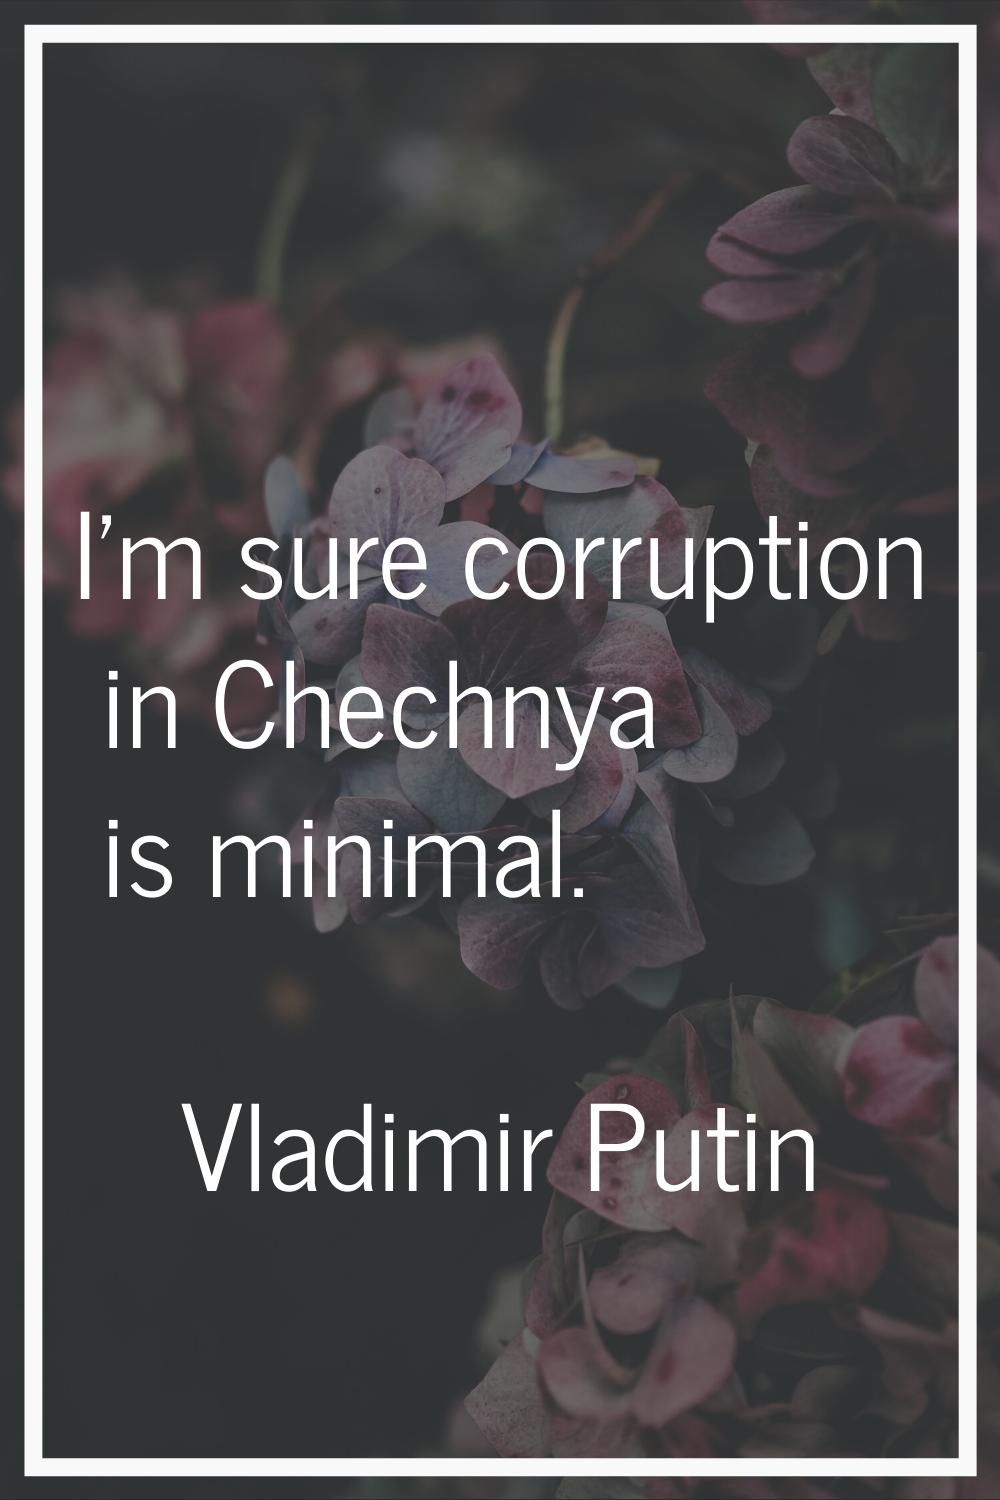 I'm sure corruption in Chechnya is minimal.